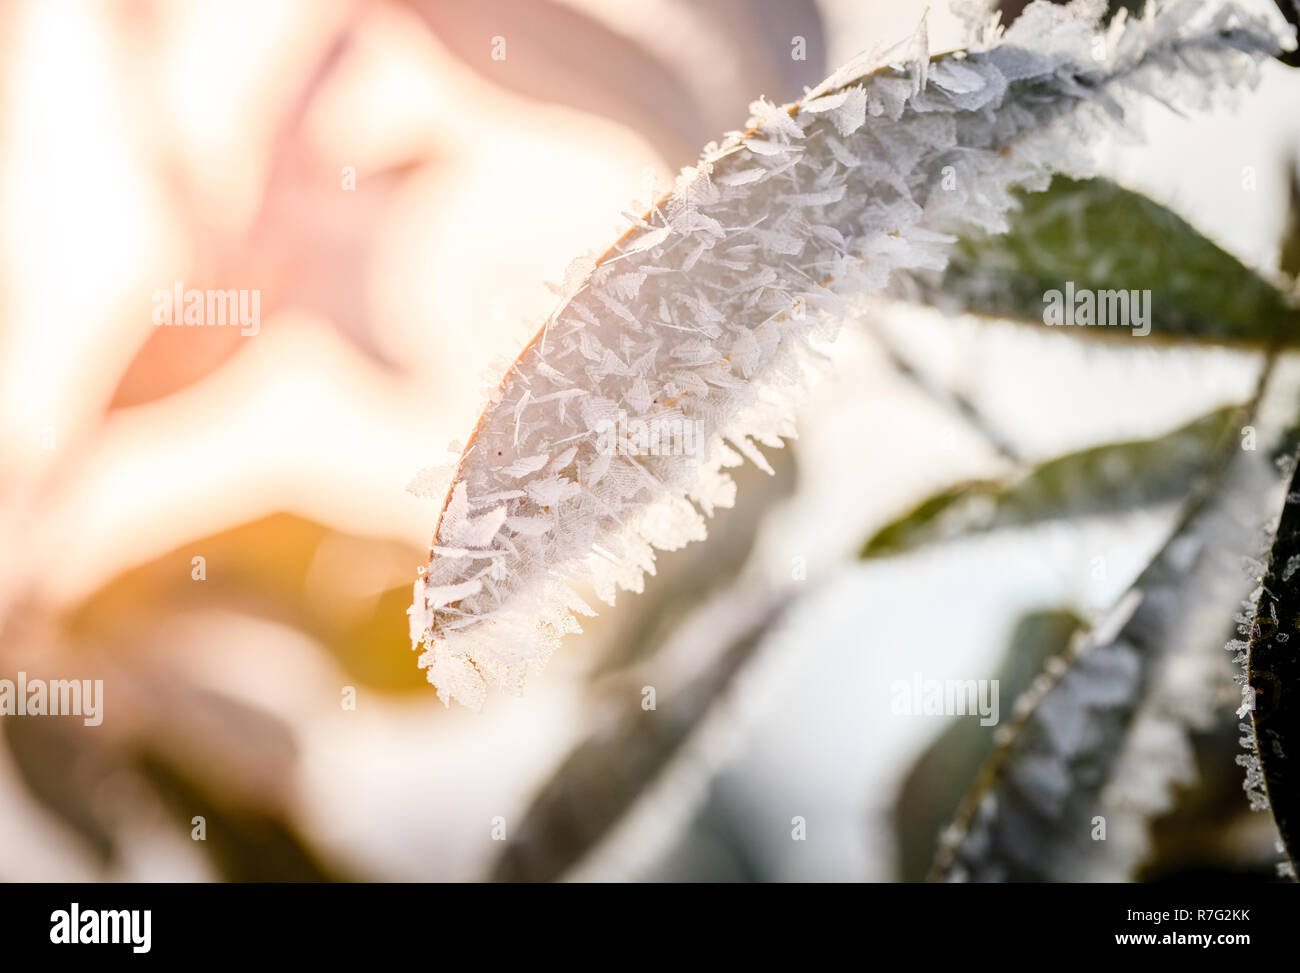 Closeup image of ice crystals covering leaves after ice storm Stock Photo